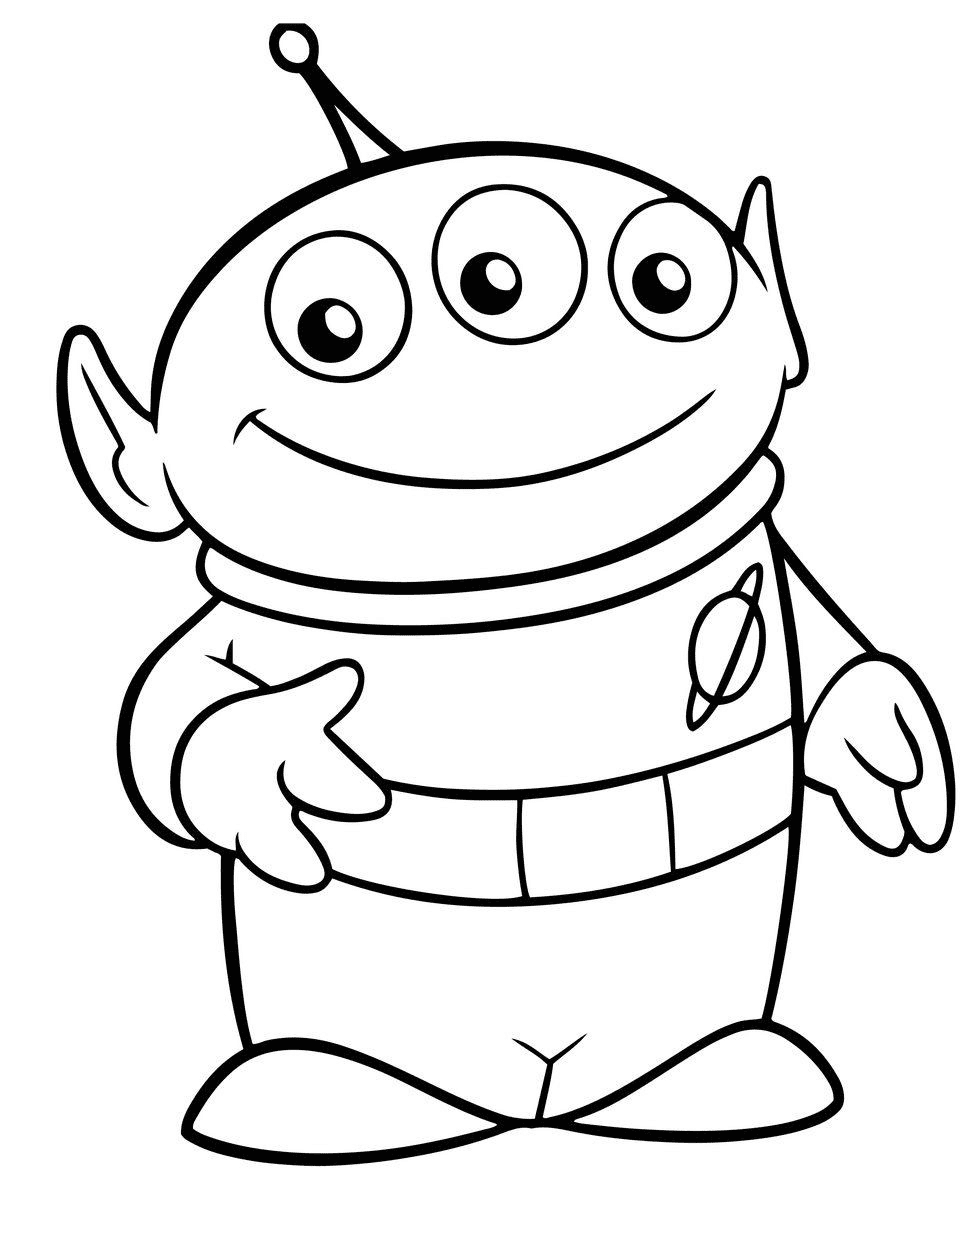 Aliens Toy Story Drawing Coloring Pages.